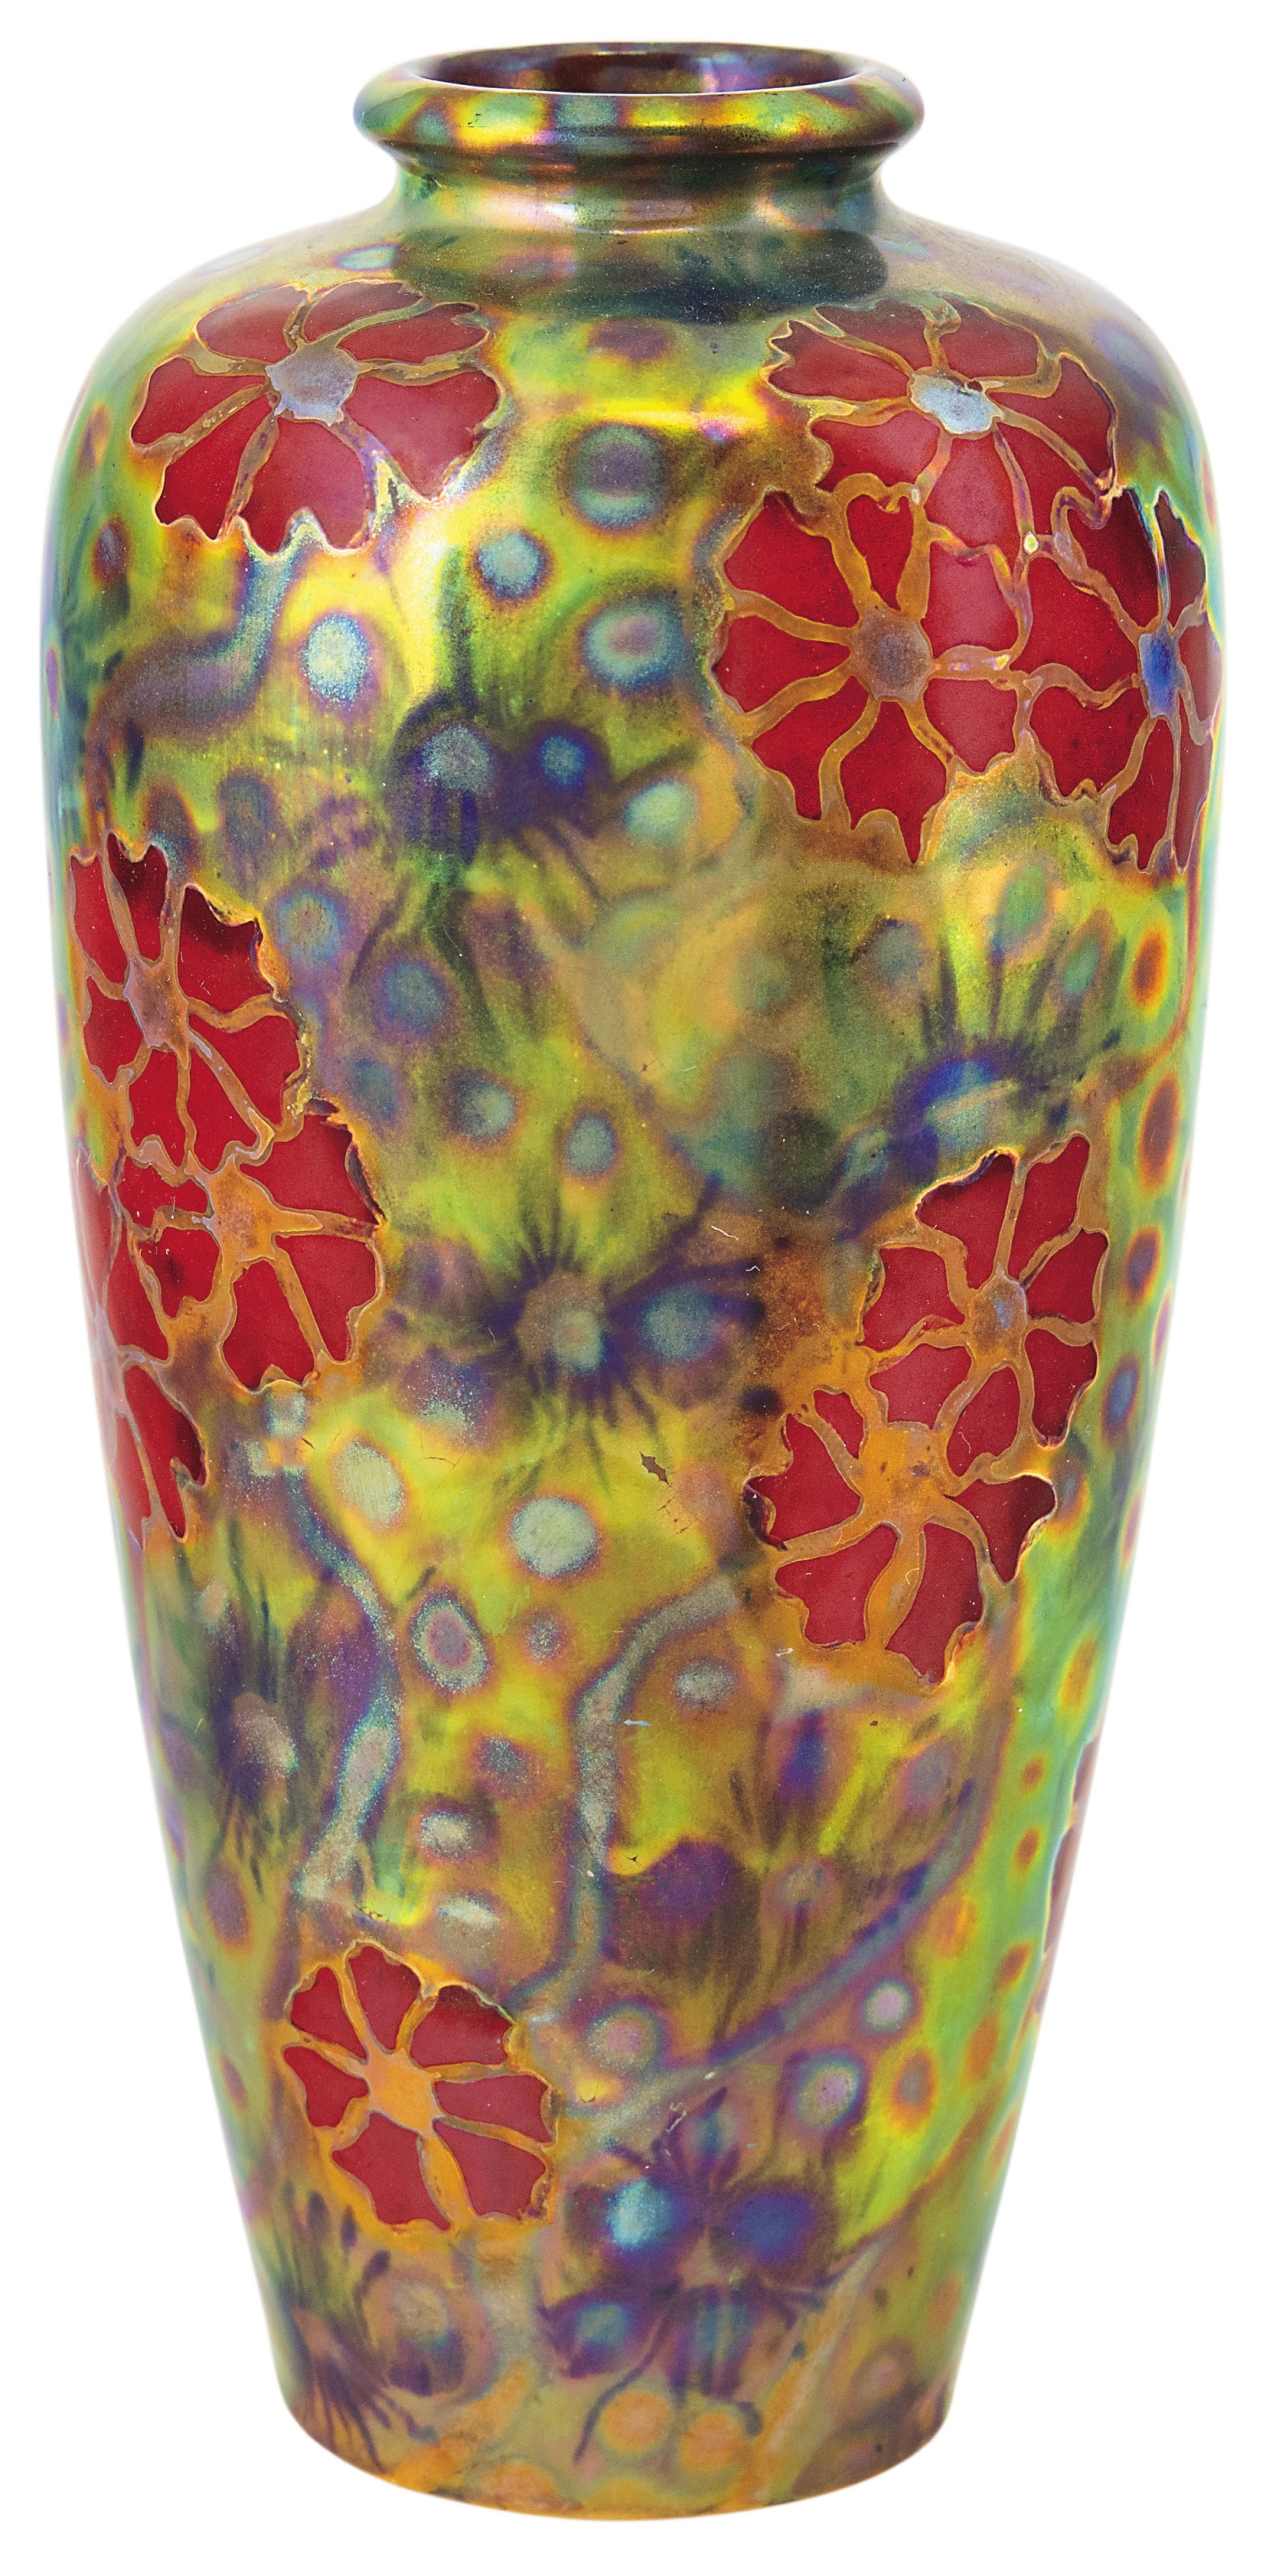 Zsolnay Vase painted with Wild Flowers, around 1906